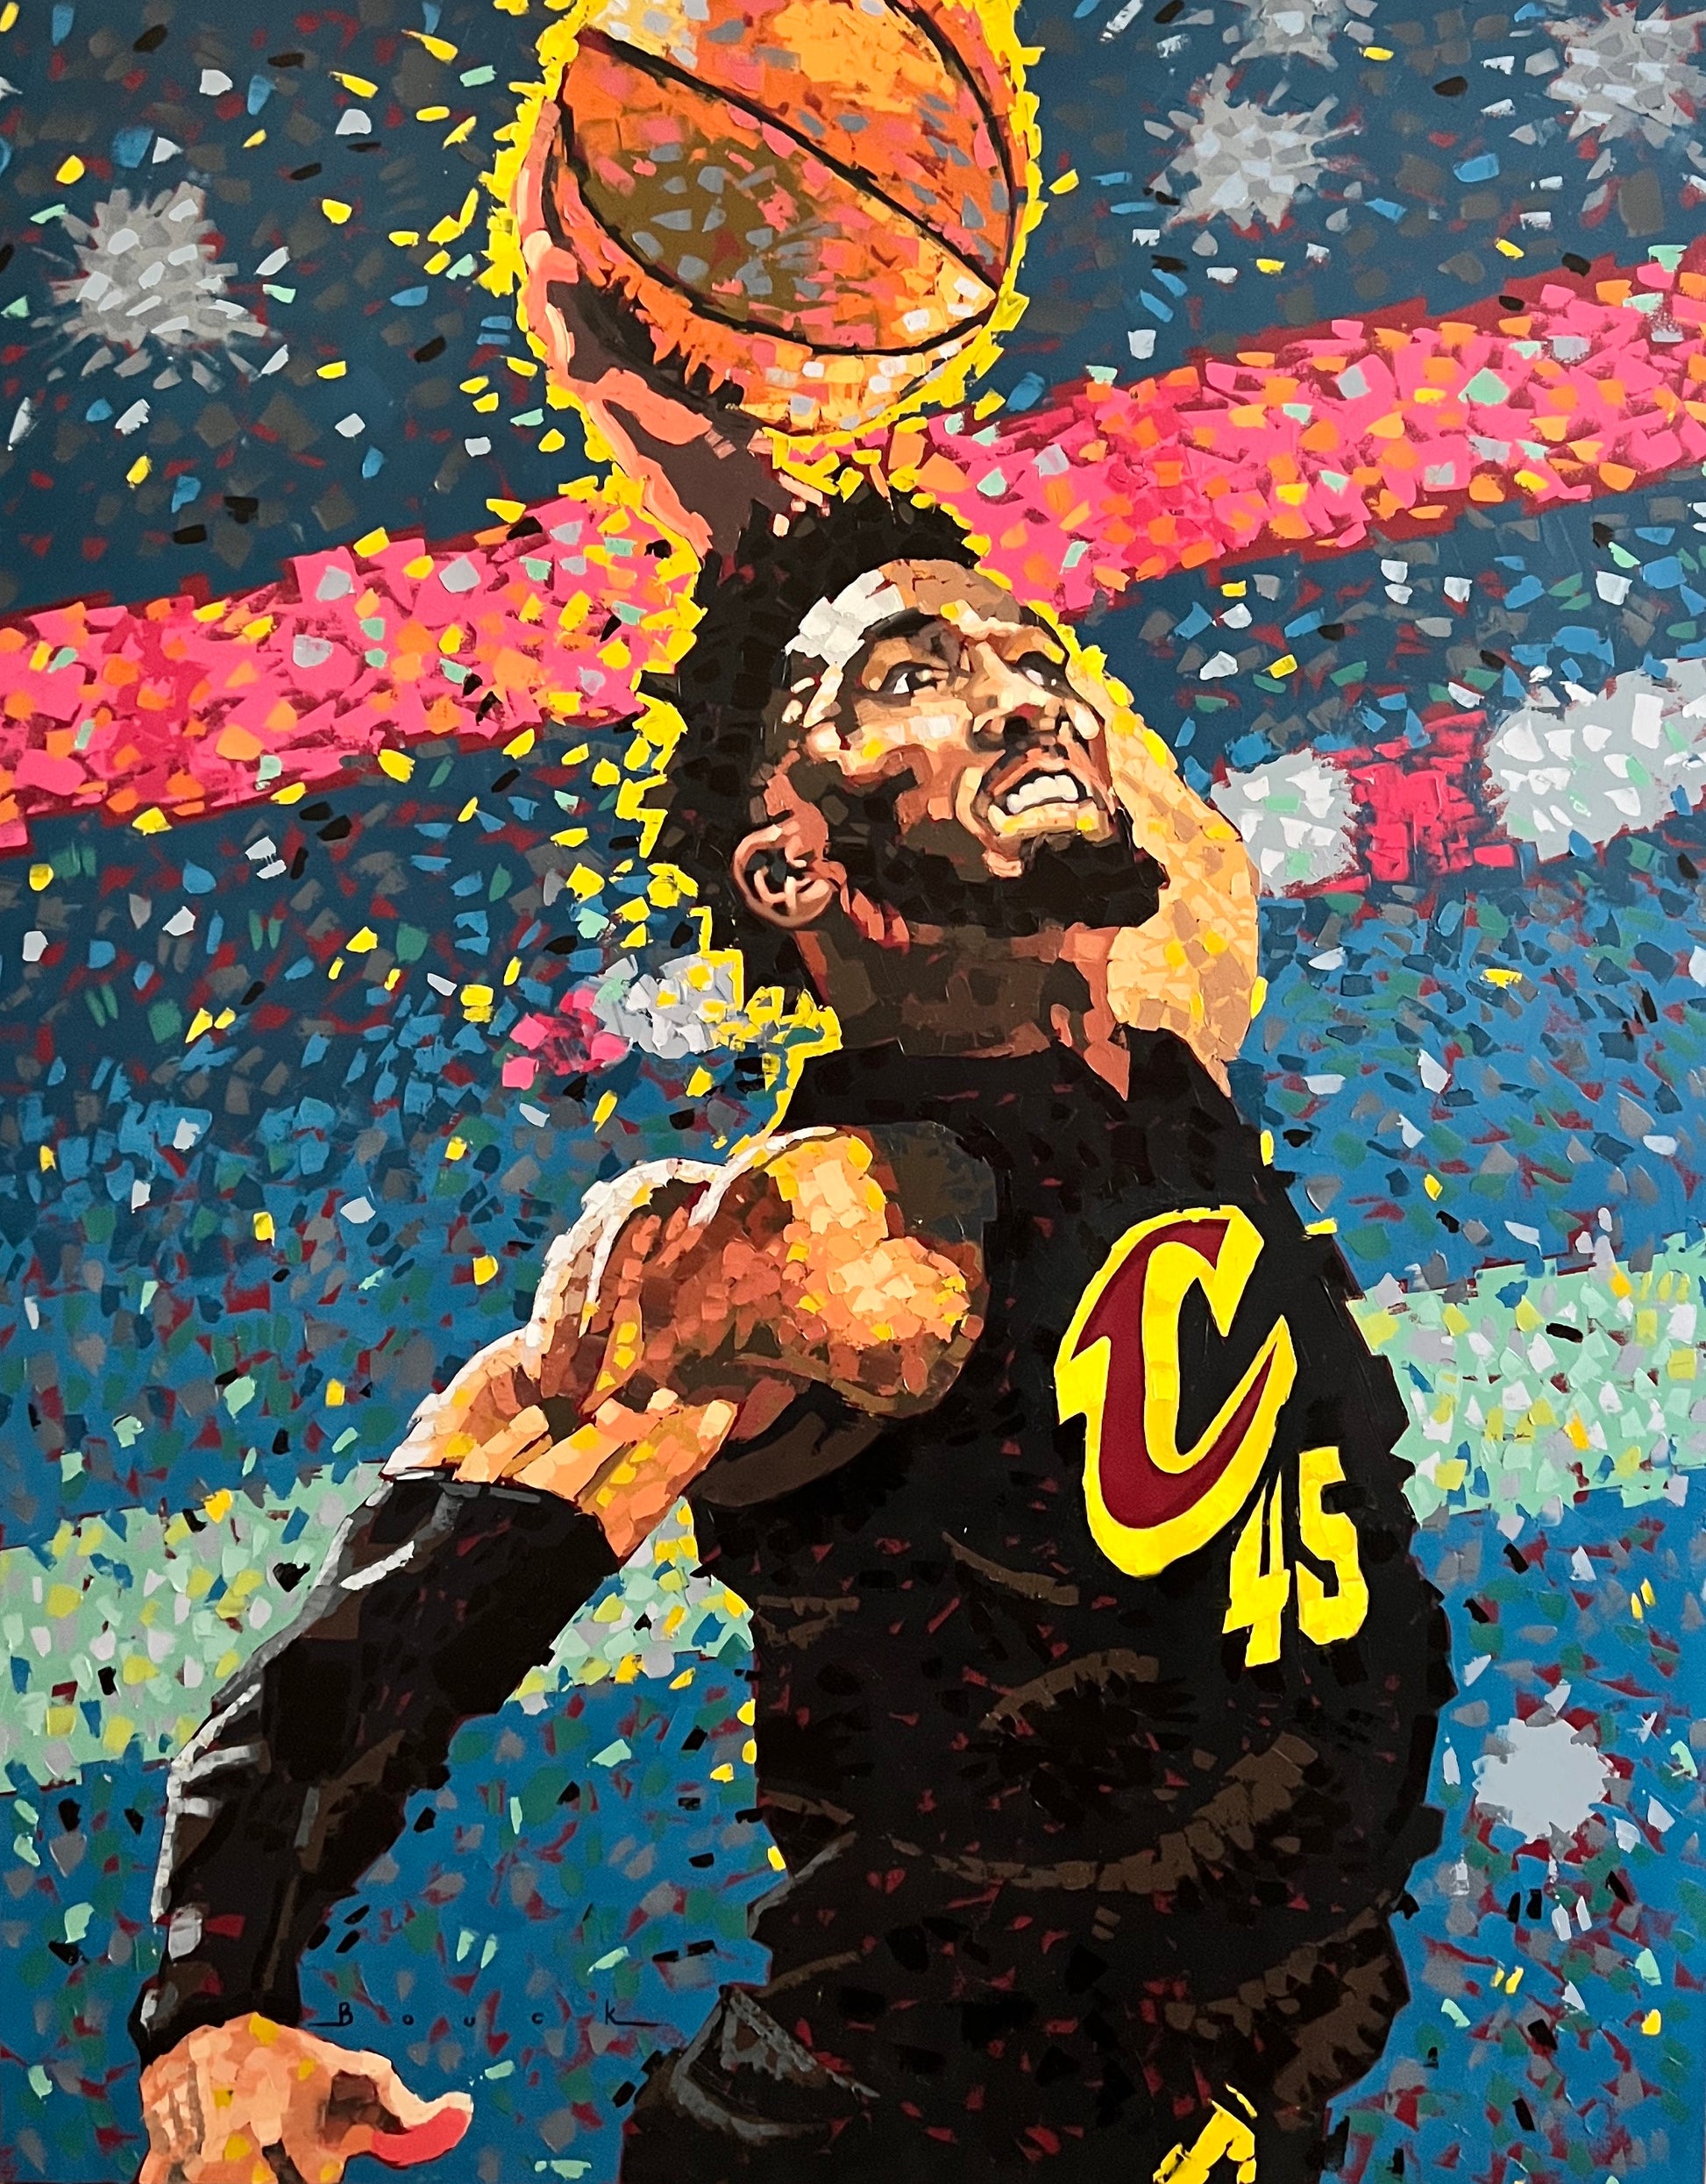 Donovan Mitchell, NBA basketball player, in a colorful painting with a basketball in hand and wearing a Cleavland Cavaliers jersey.